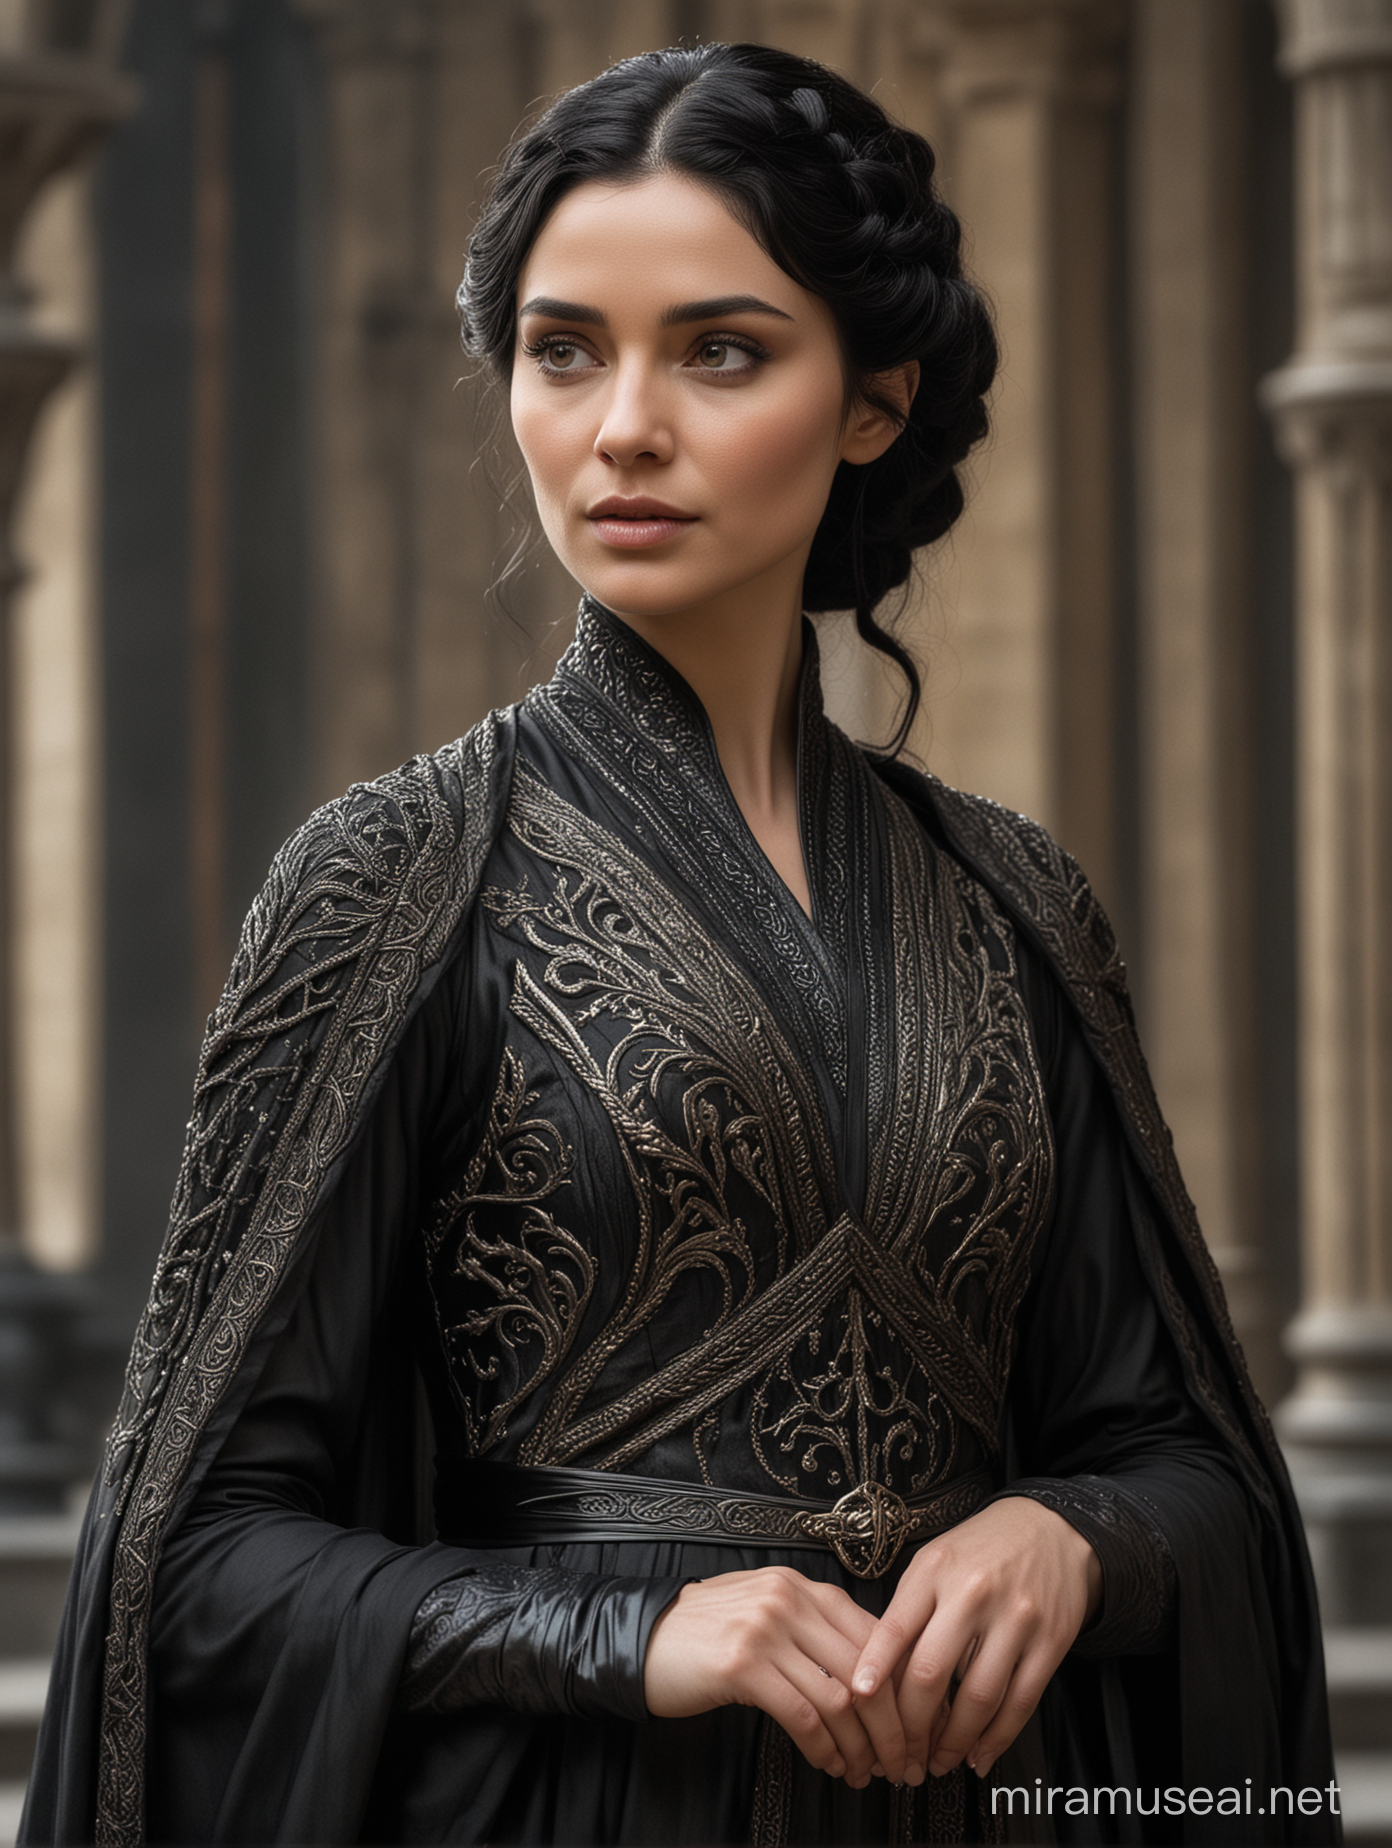 Elegant Valyrian Woman in Black Imperial Gown with Distinctive Styling